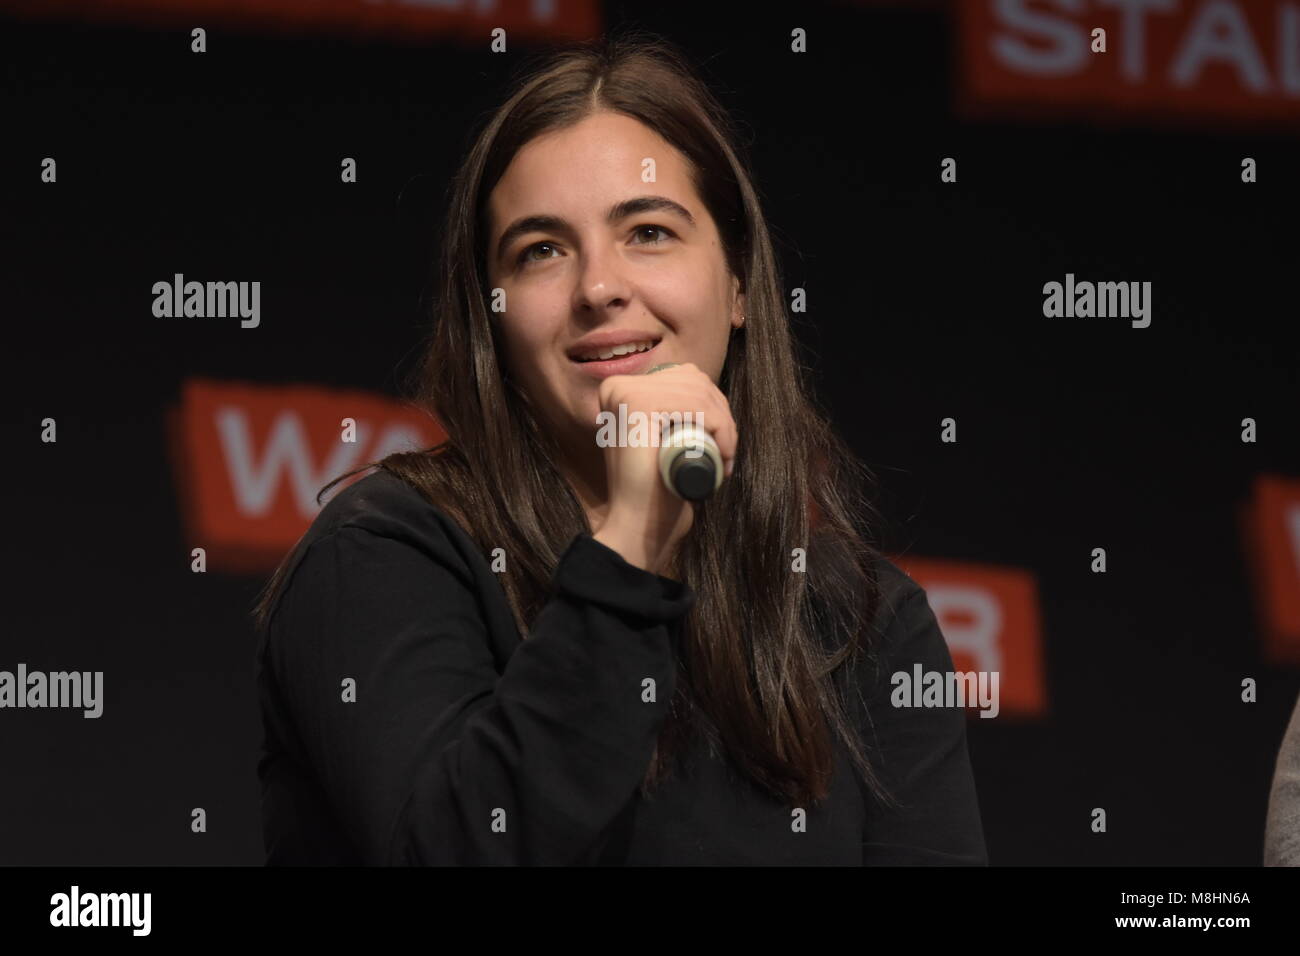 MANNHEIM, GERMANY - MARCH 17: Actress Alanna Masterson (Tara on The Walking Dead) at the Walker Stalker Germany convention. (Photo by Markus Wissmann) Stock Photo